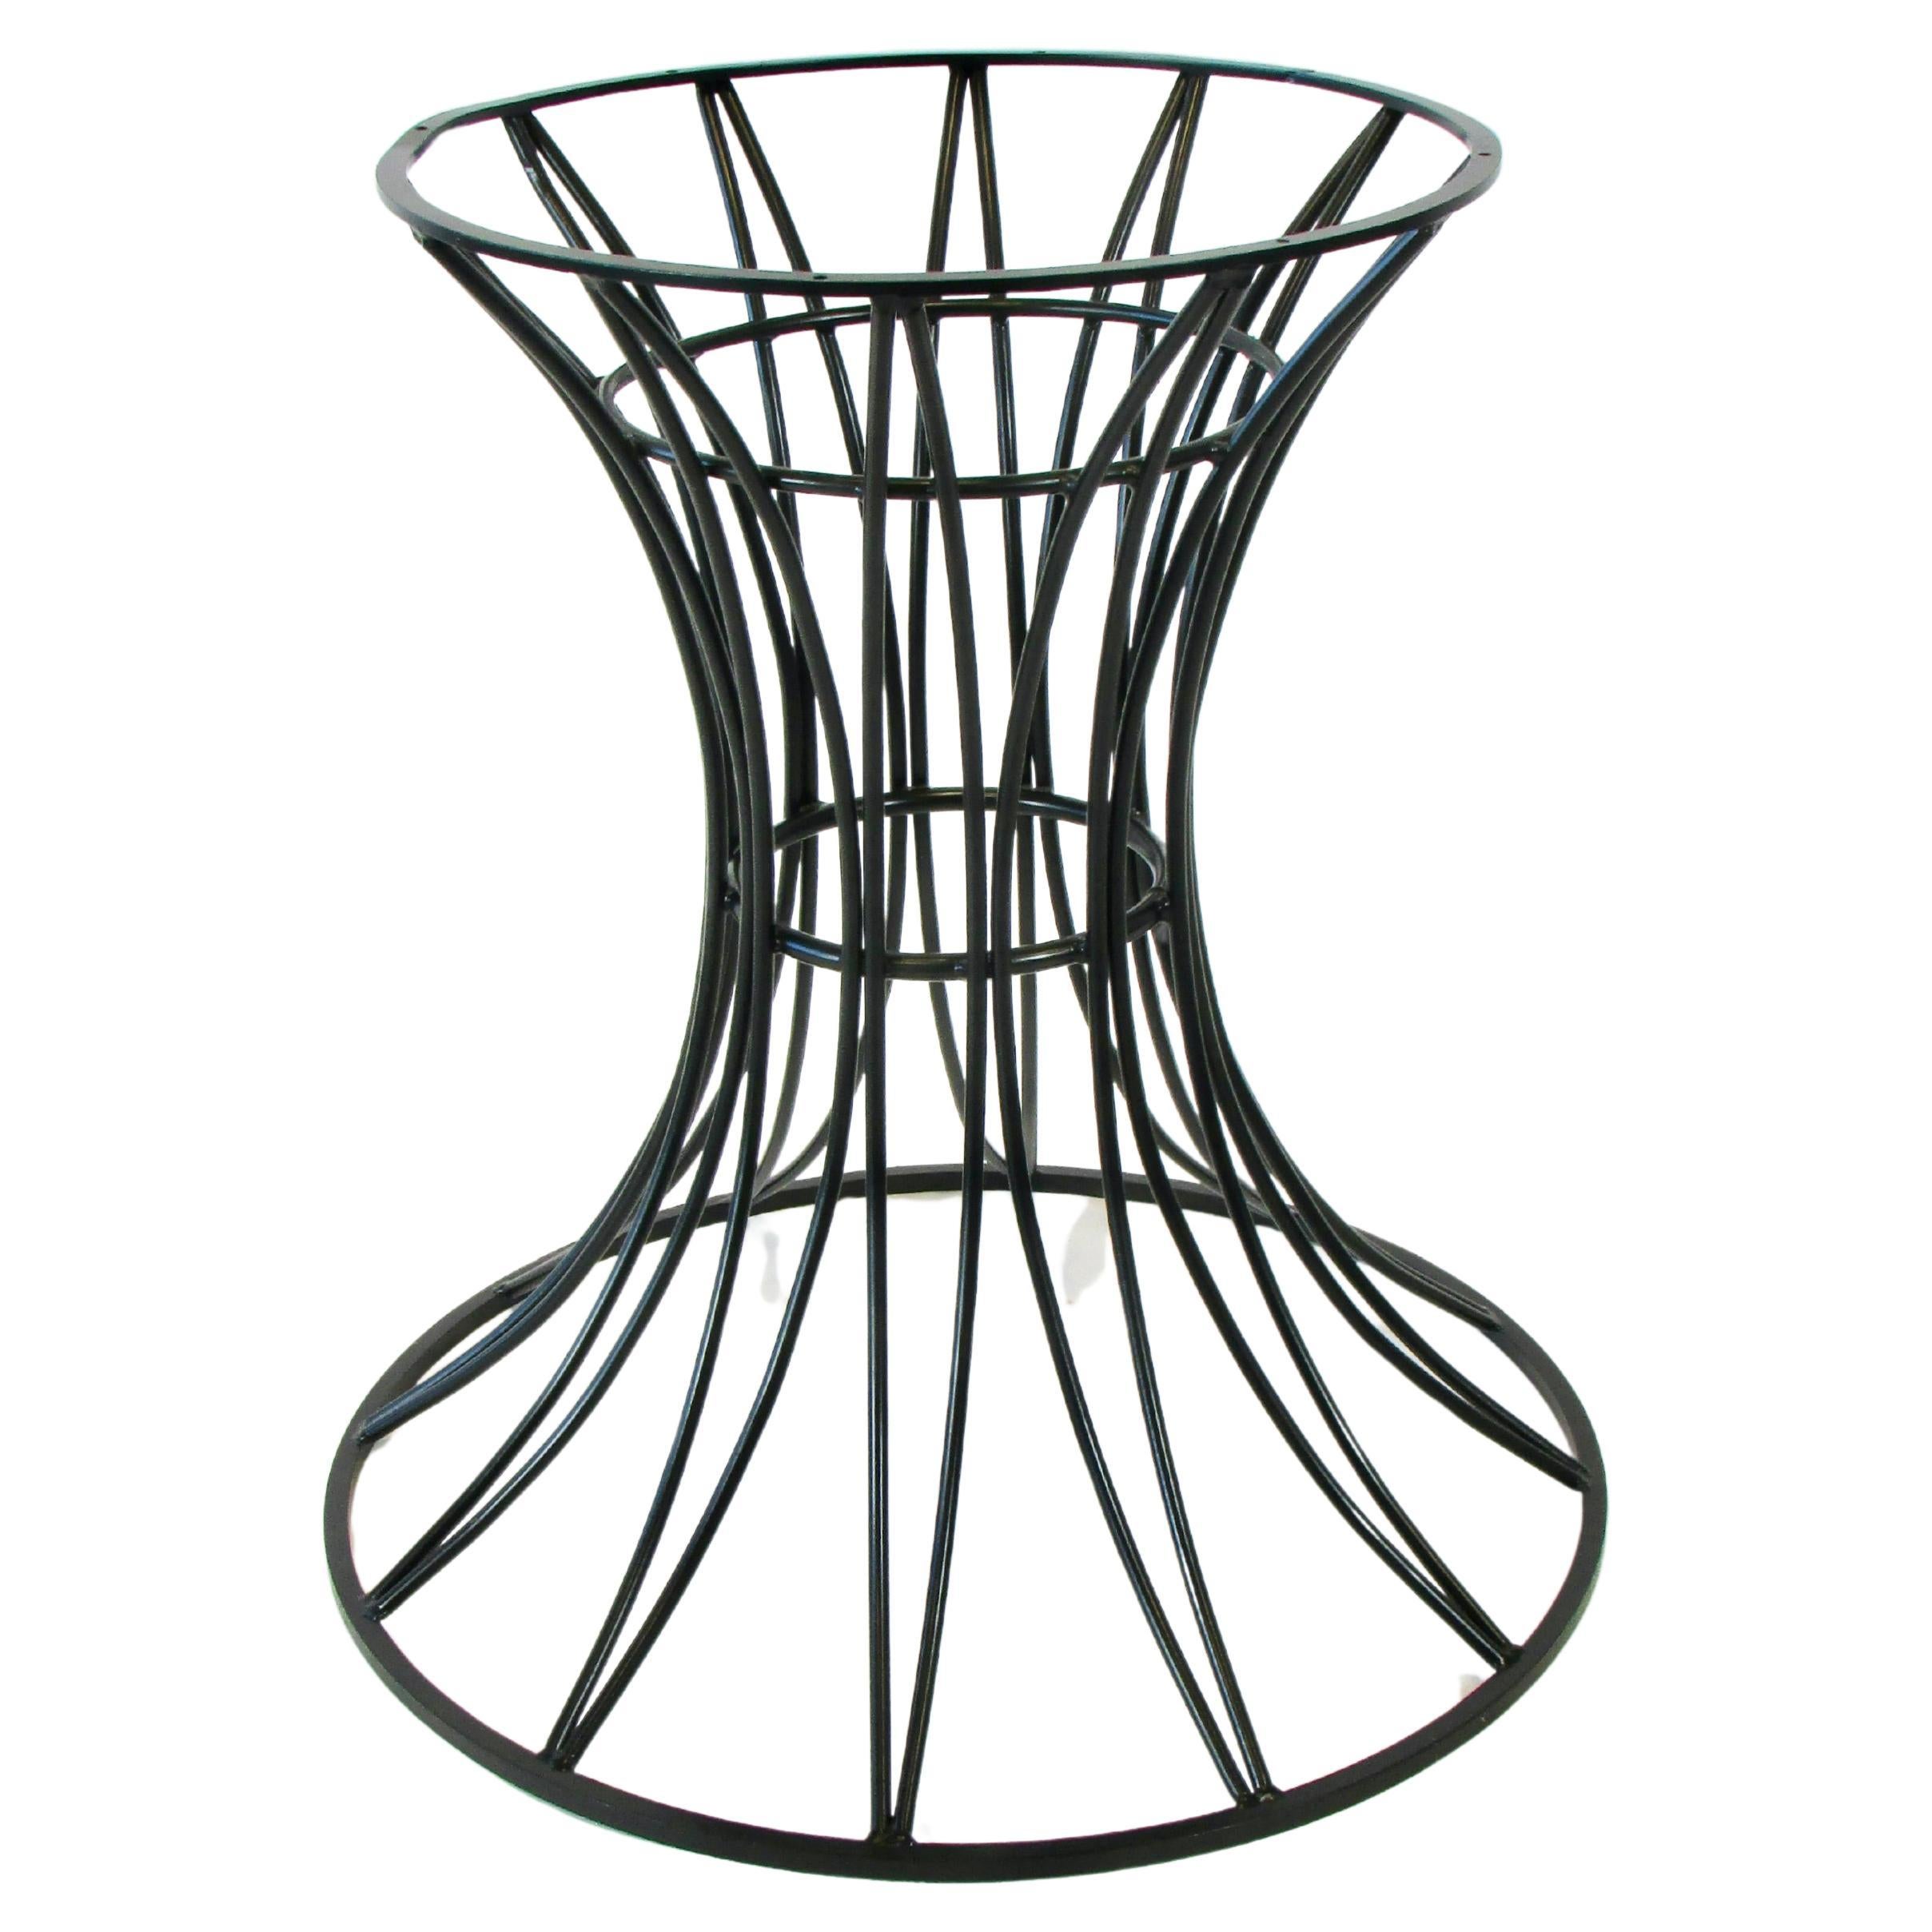 Wrought Iron Dining Table Base in Matte Black Powder Coat